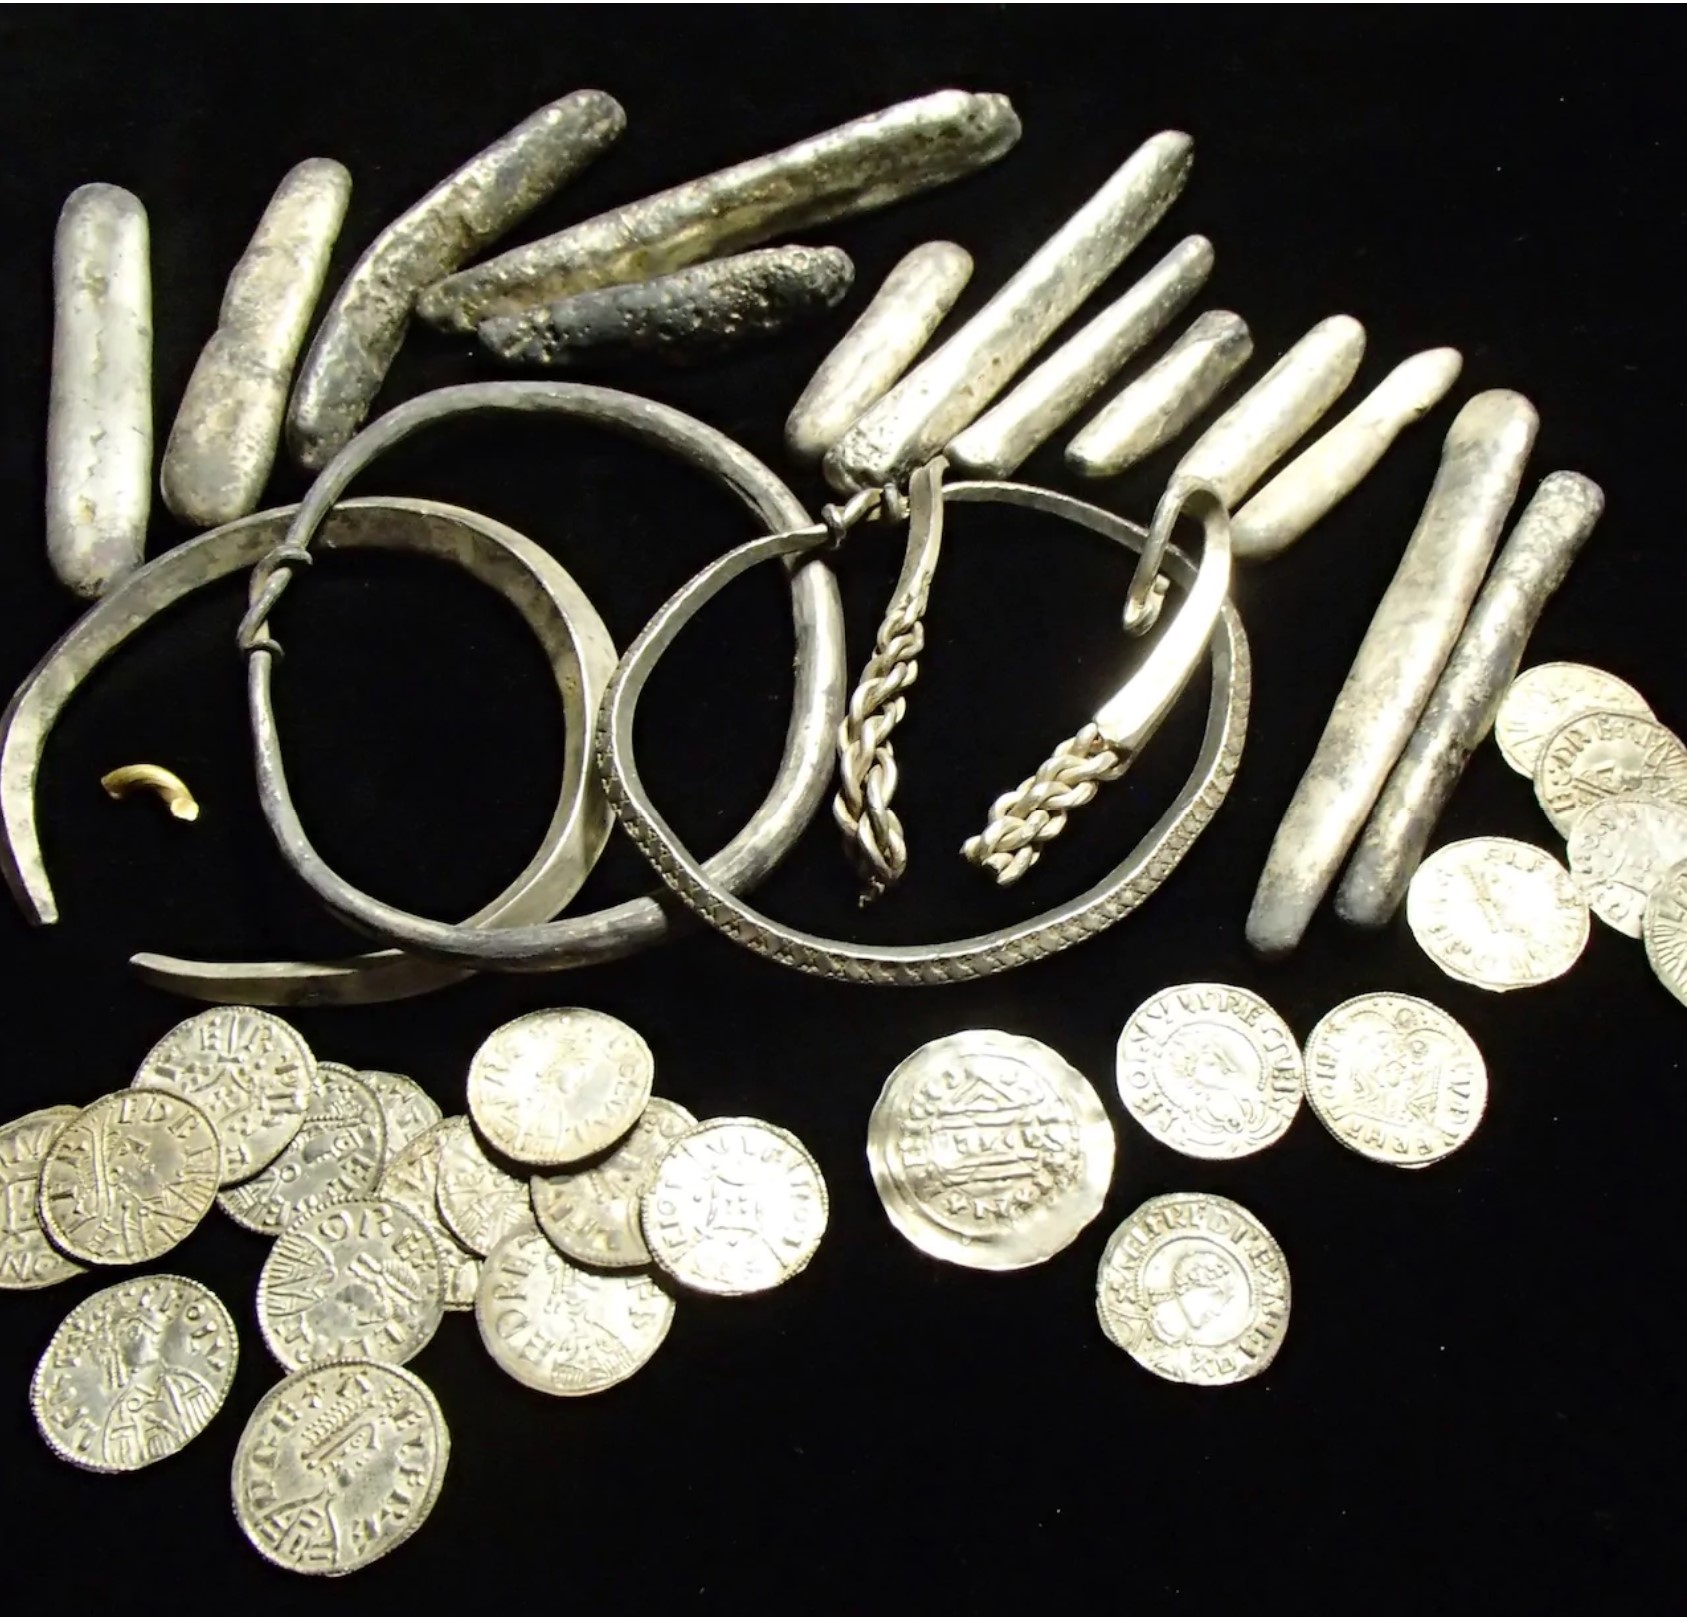 Since 1997, over 11,000 legally recognised metal detector treasures have been discovered in England